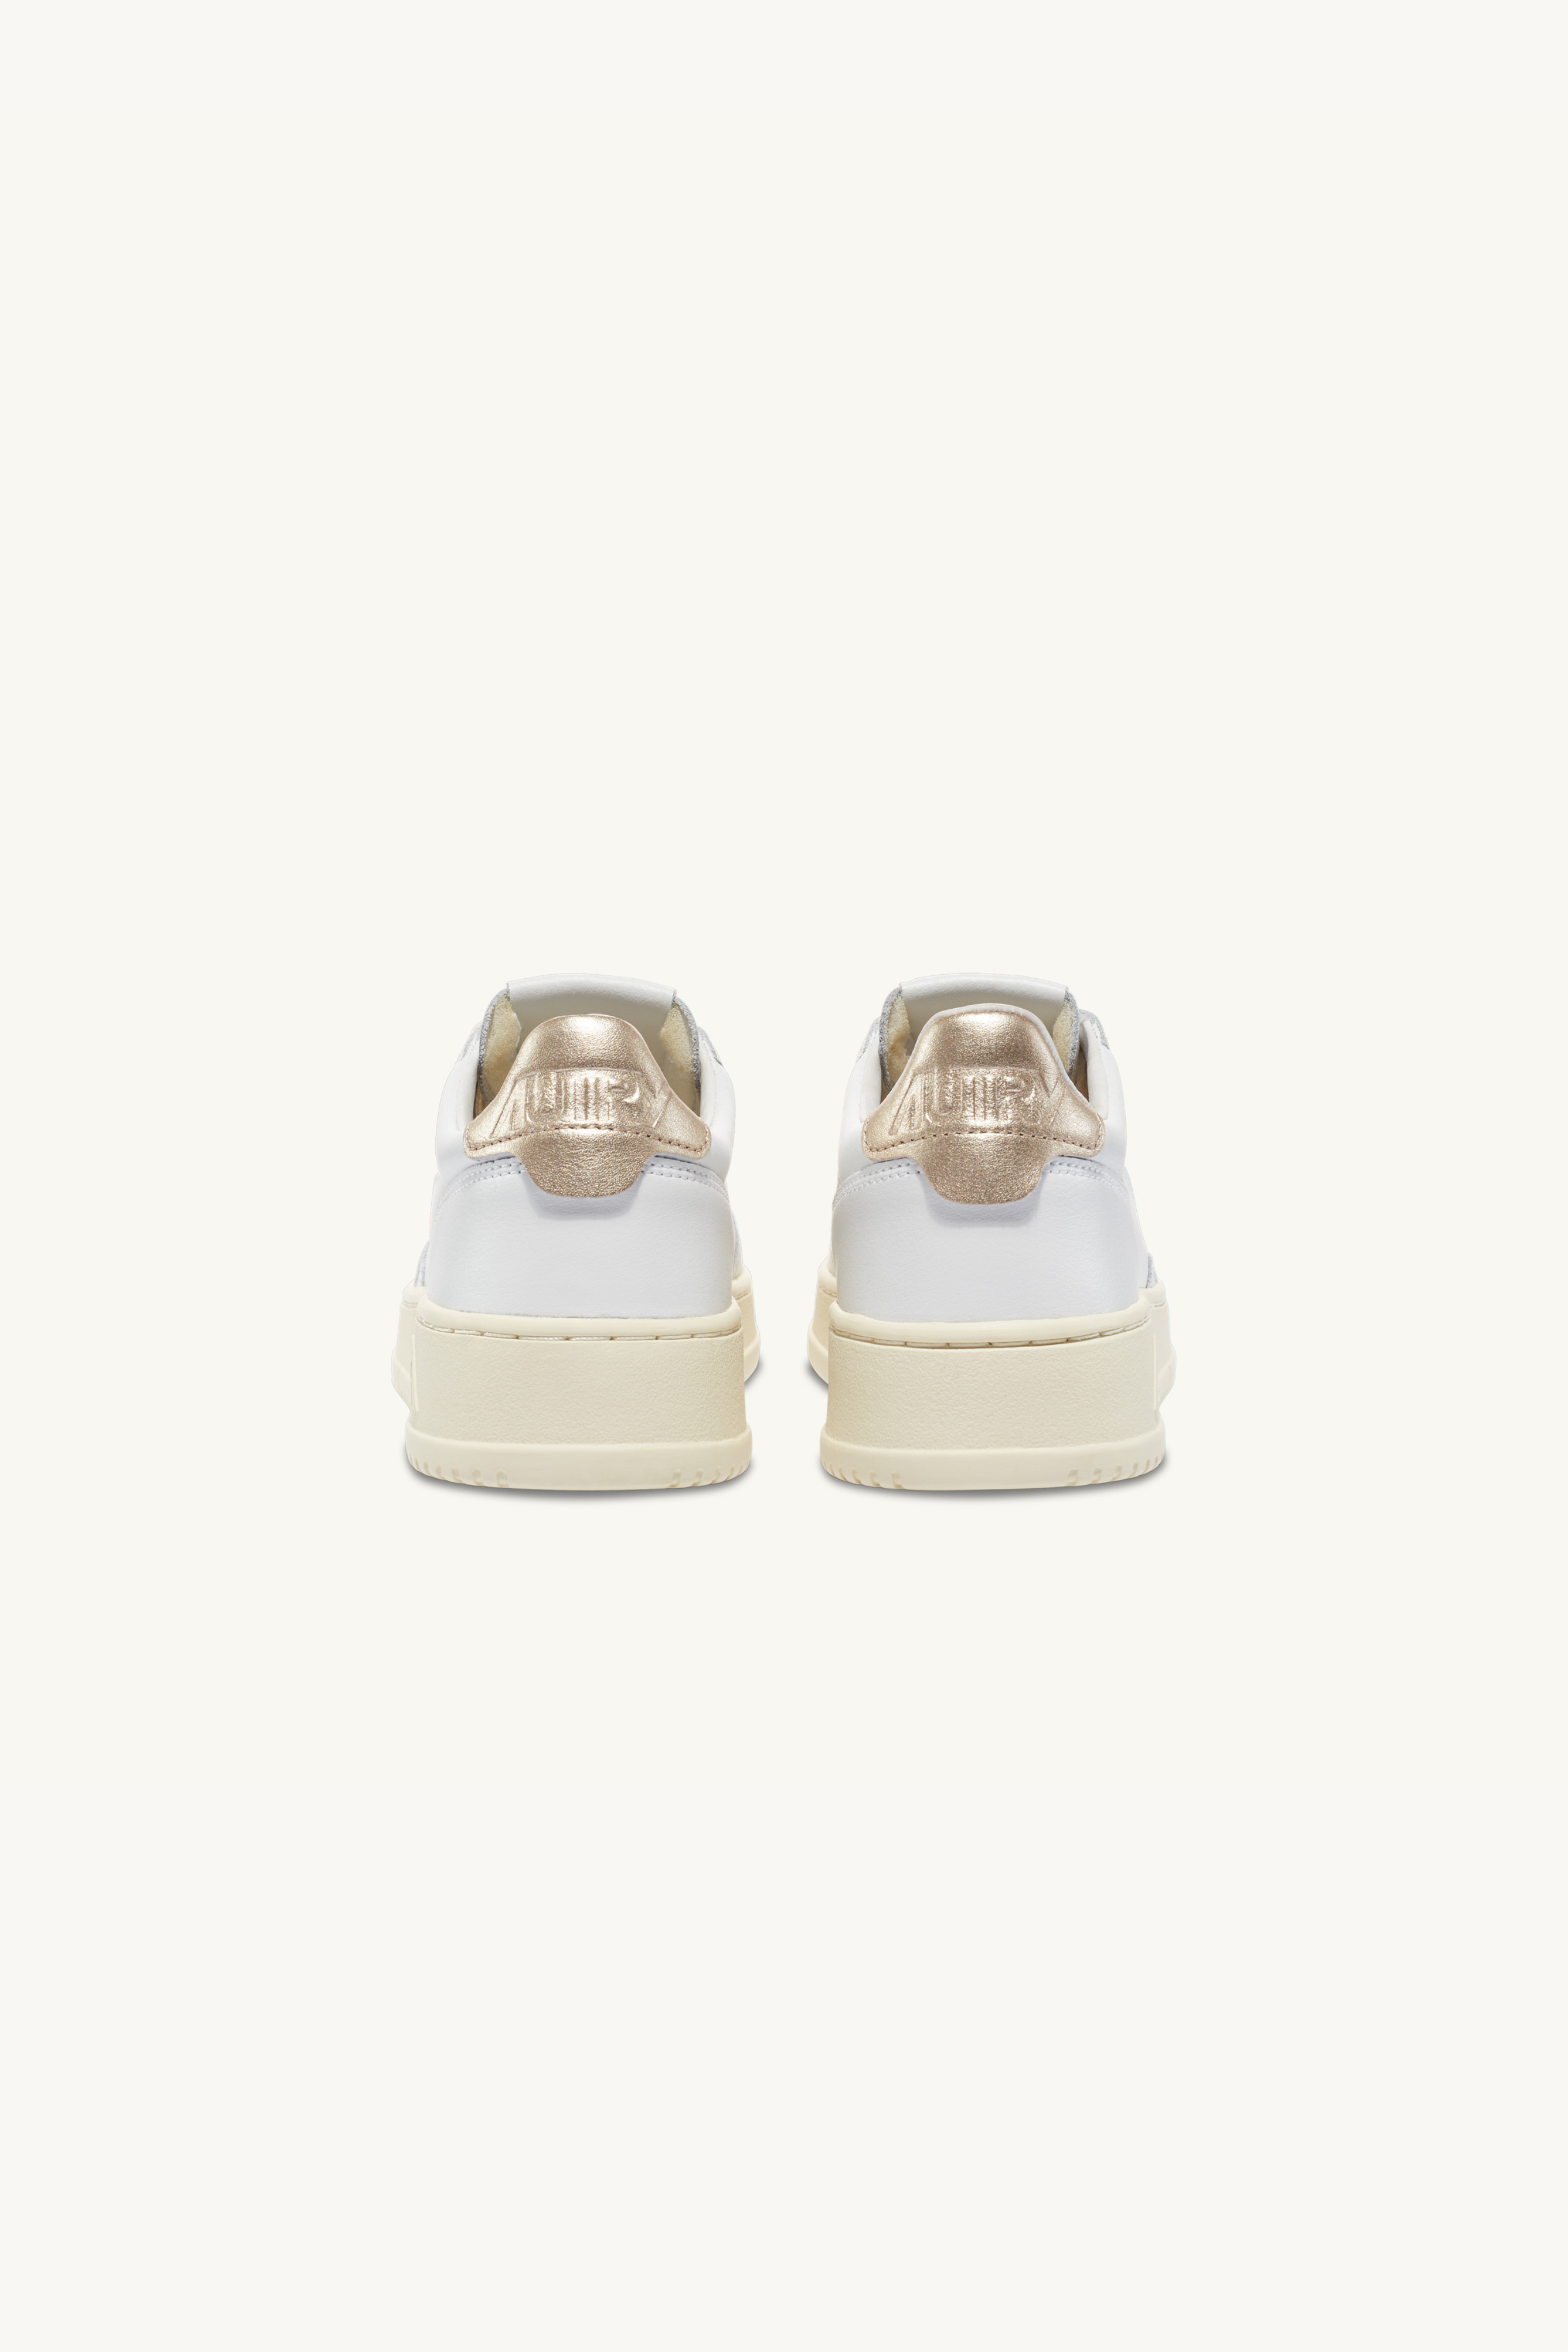 AULW-LL06 - MEDALIST LOW SNEAKERS IN LEATHER WHITE AND GOLD